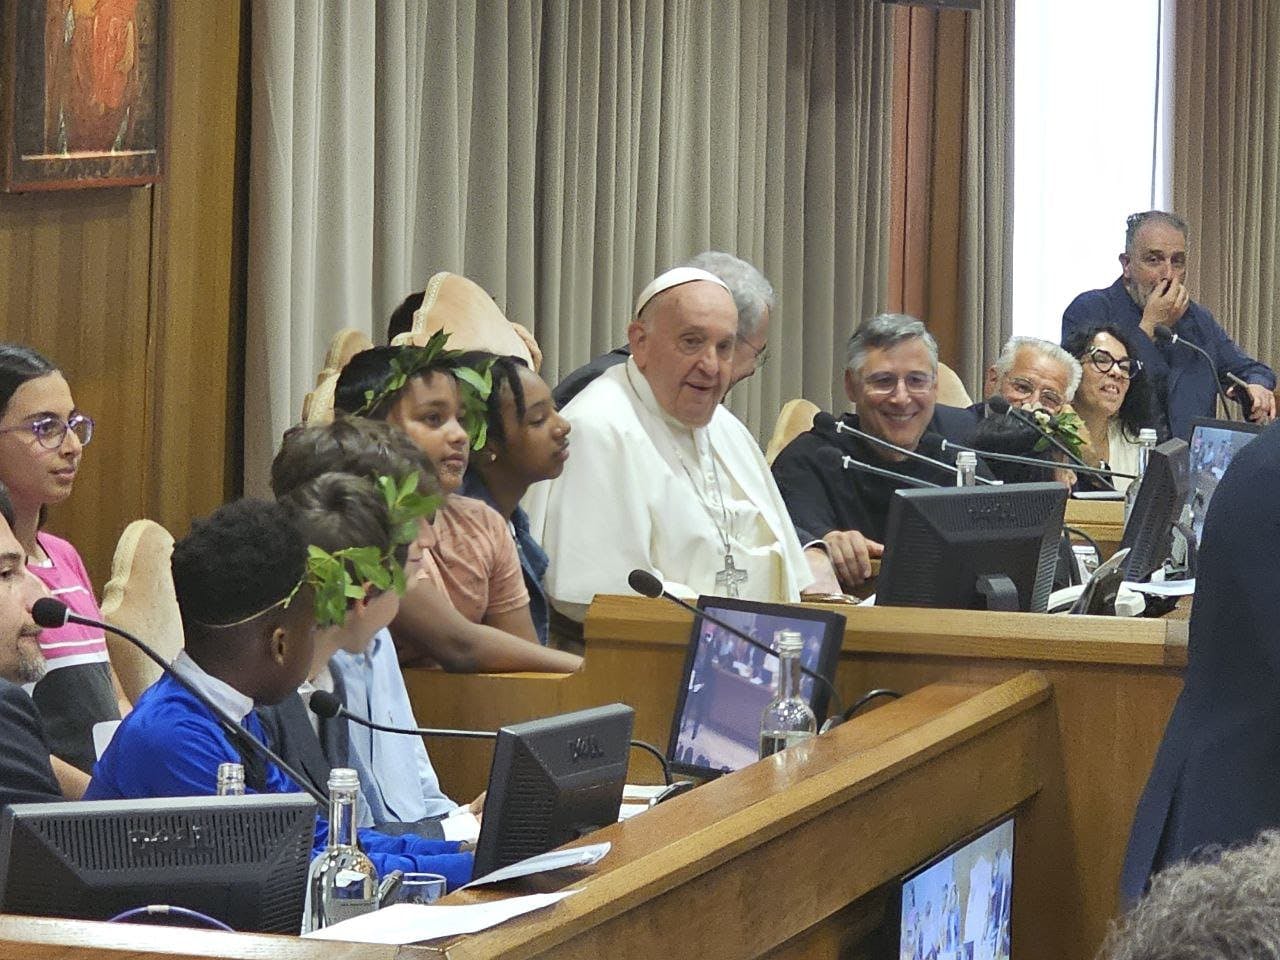 Meeting in the Vatican in preparation for the World Children’s Day with Pope Francis: can happiness be bought?